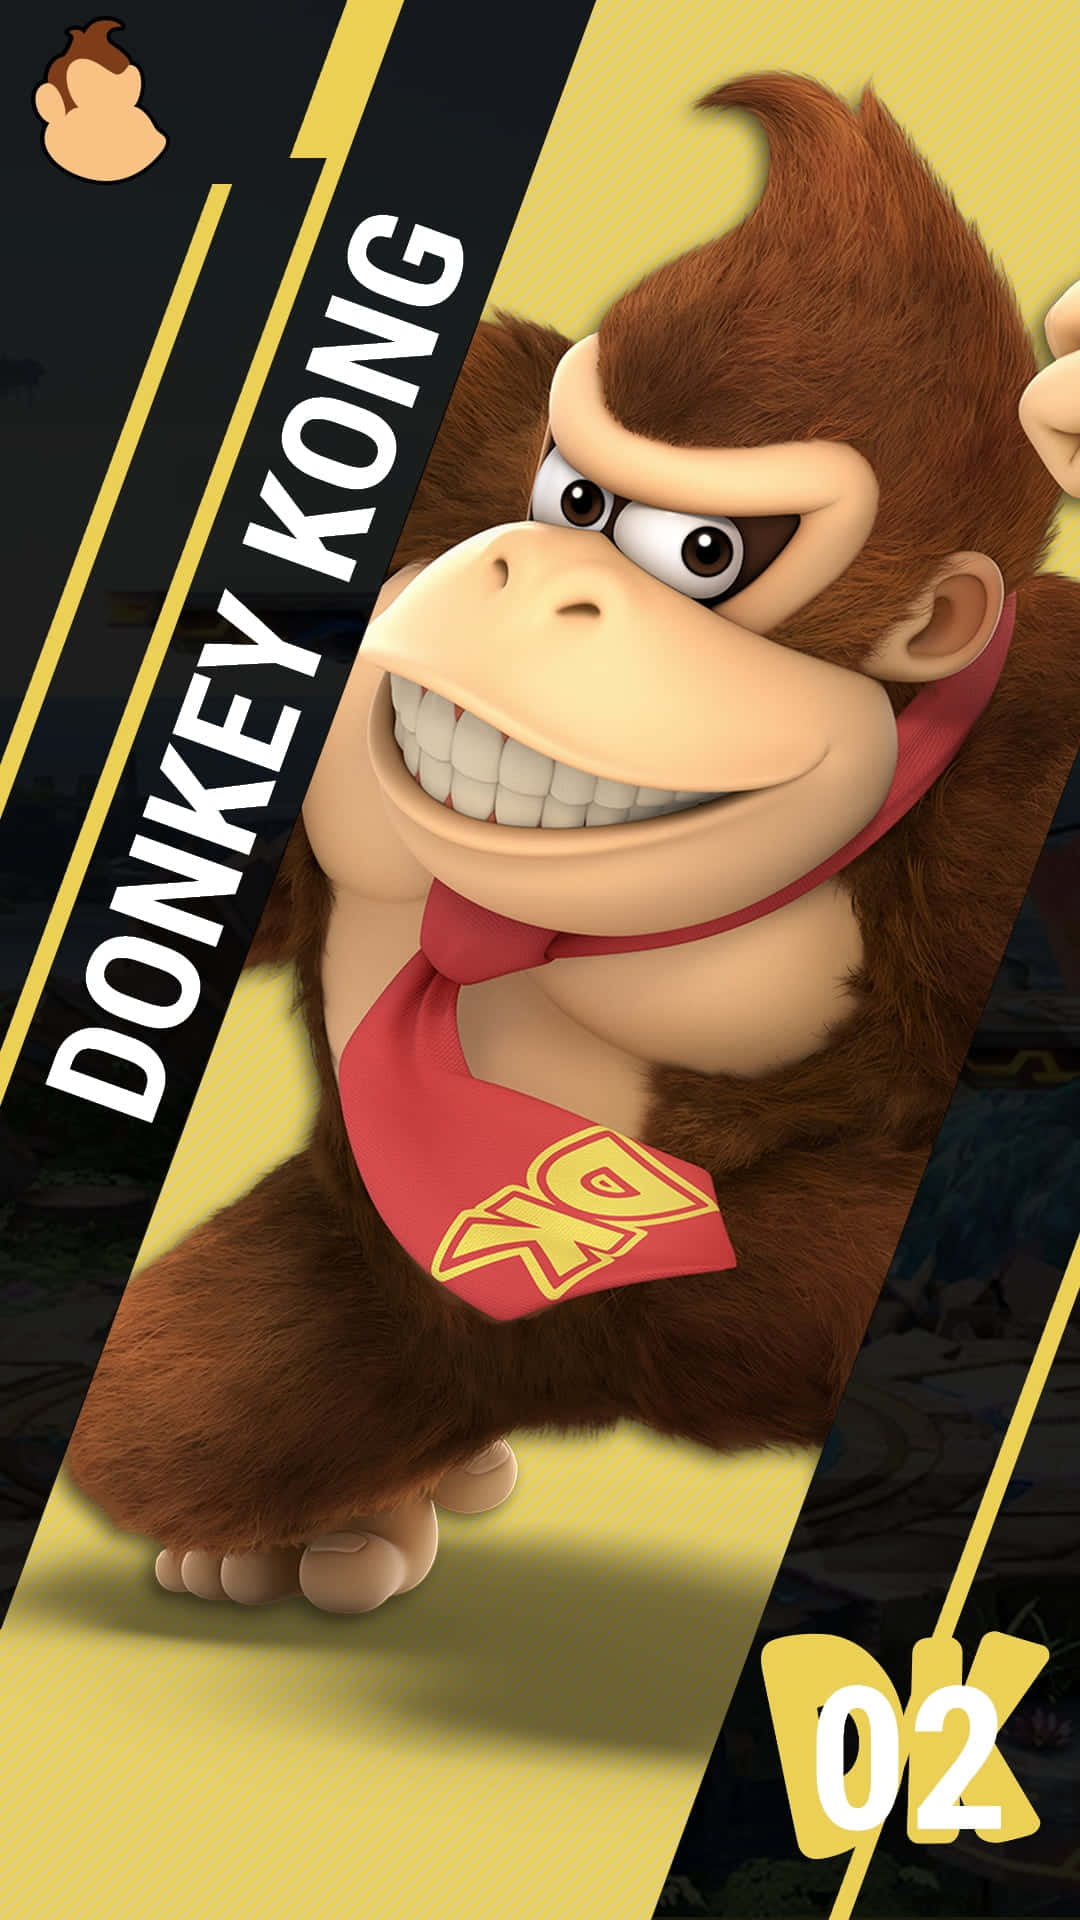 Donkey Kong In Action, Smashing His Way Through Obstacles Background